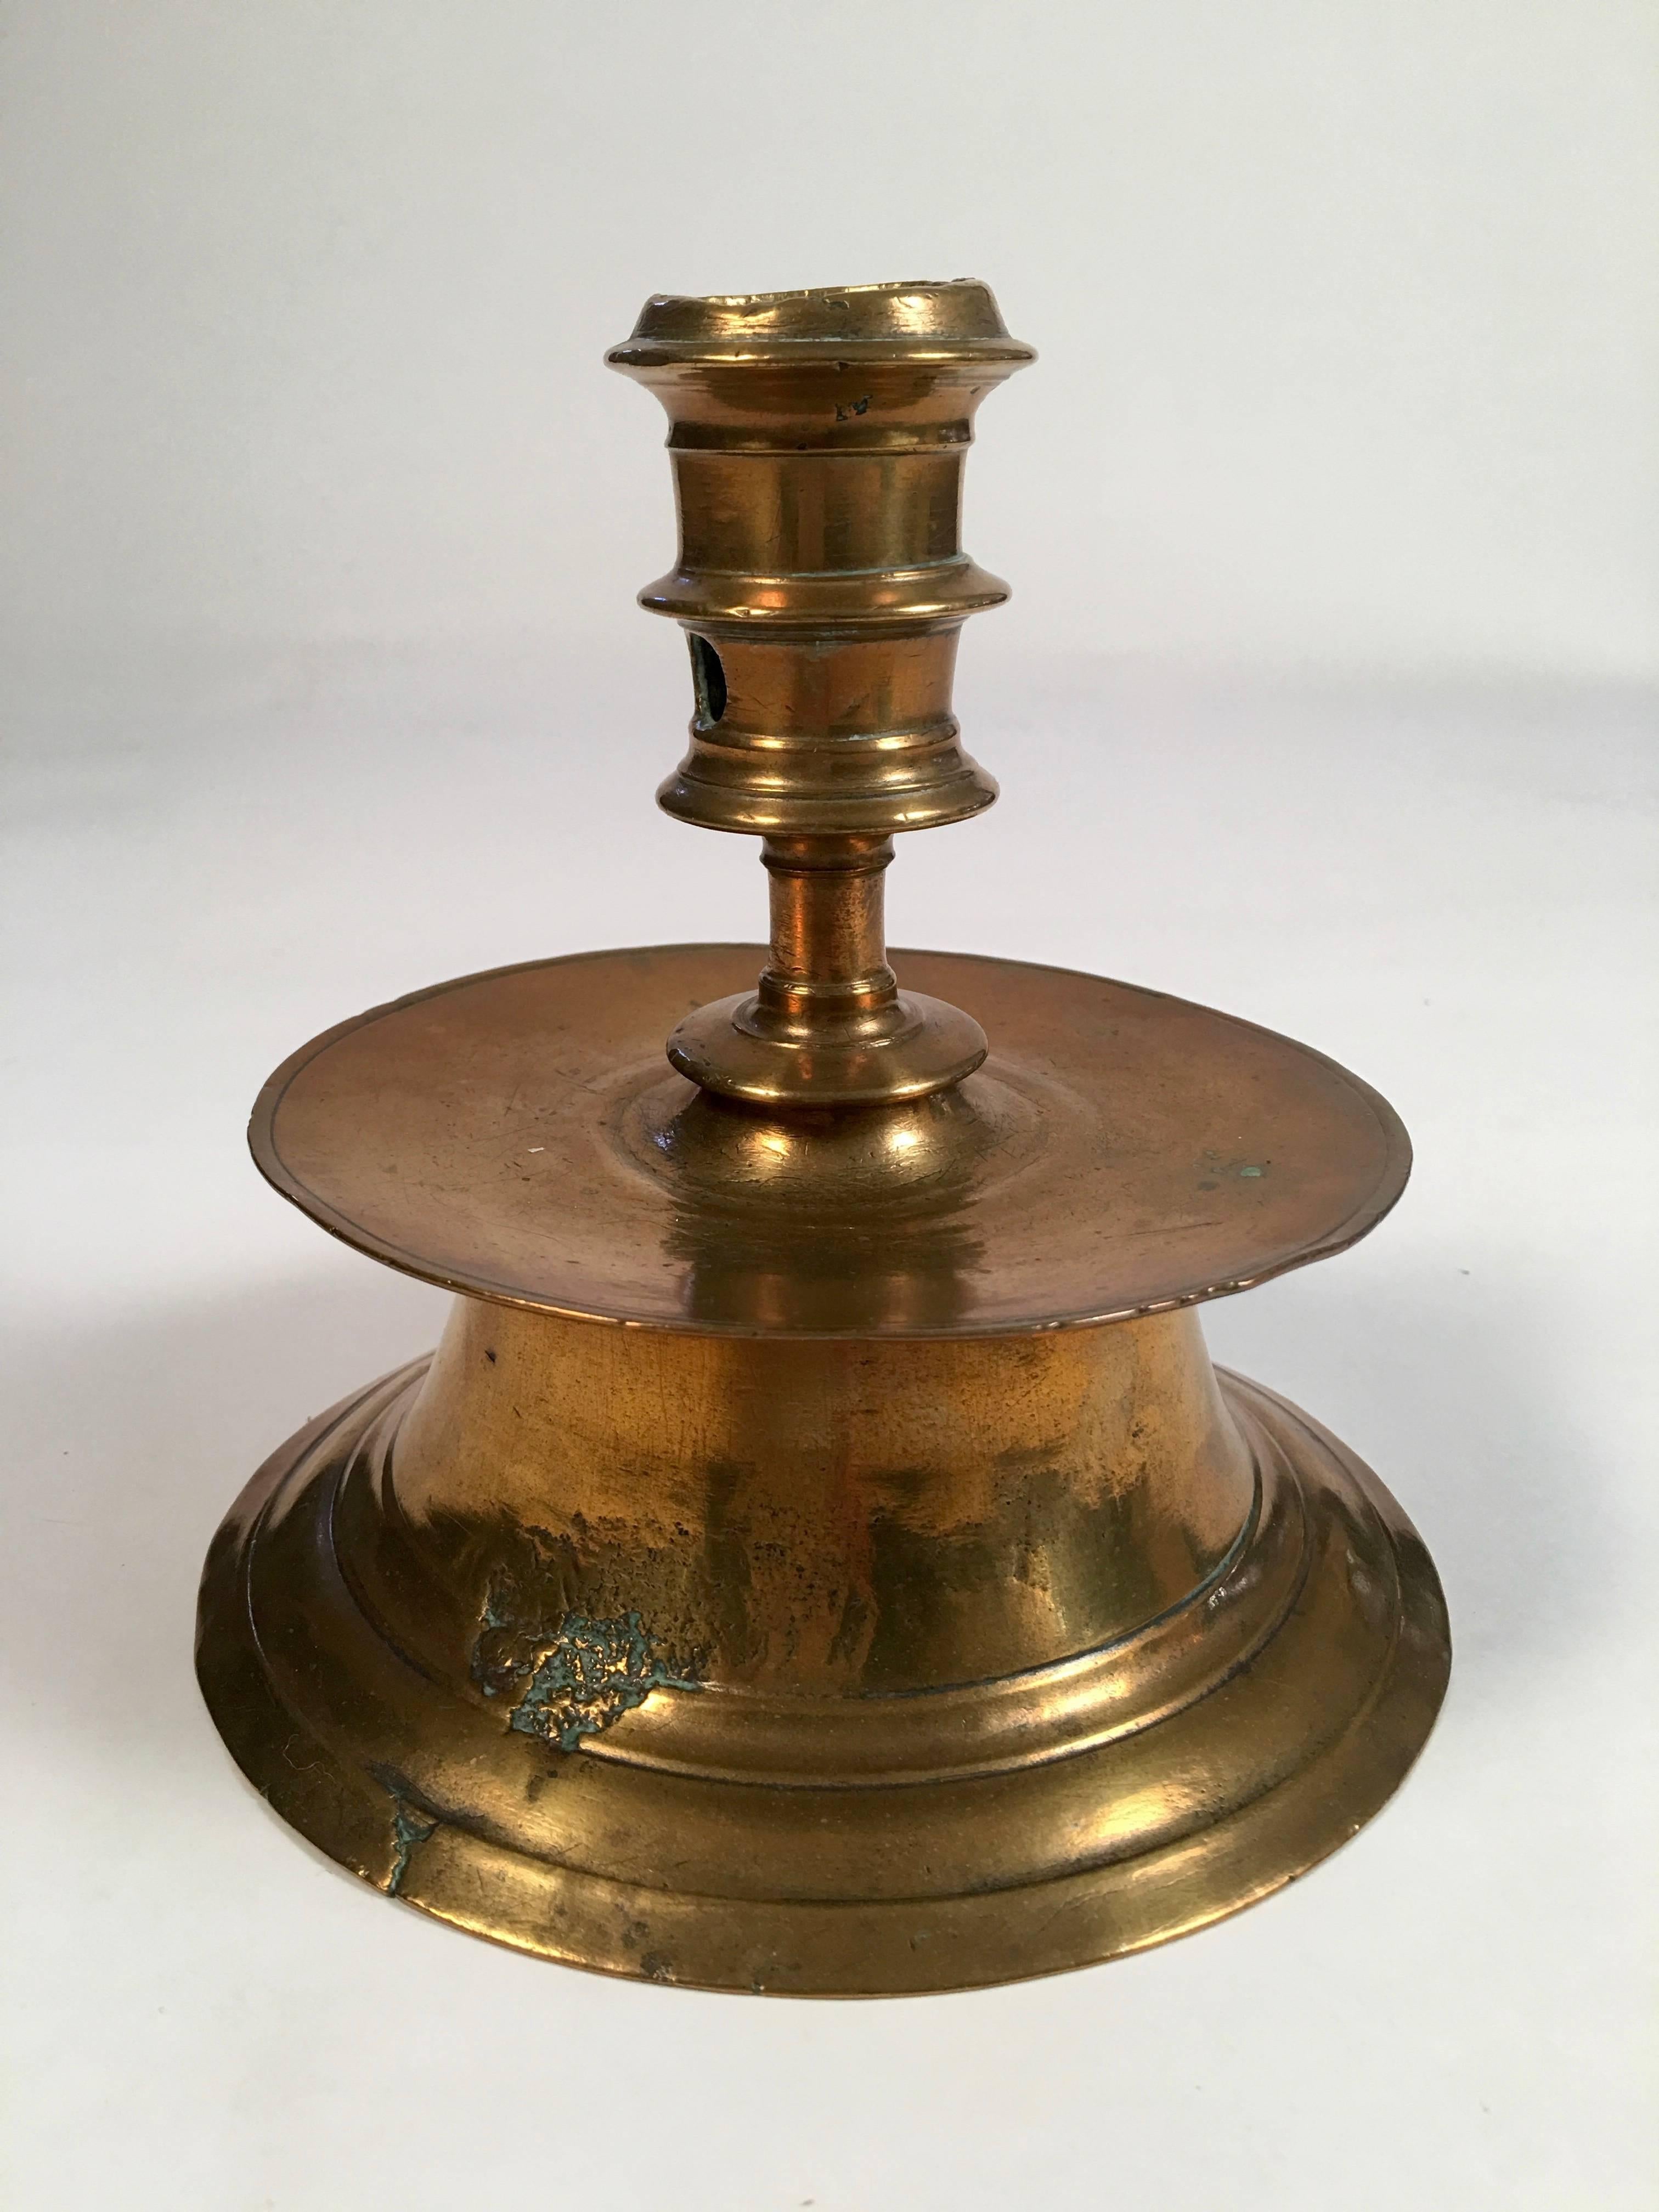 A pair of 17th century (or earlier) European brass capstan candlesticks, the tapered socket with candle stub hole over a wide drip catcher, on a raised spreading circular base. Historic Deerfield Museum accession number P118 painted in red on the